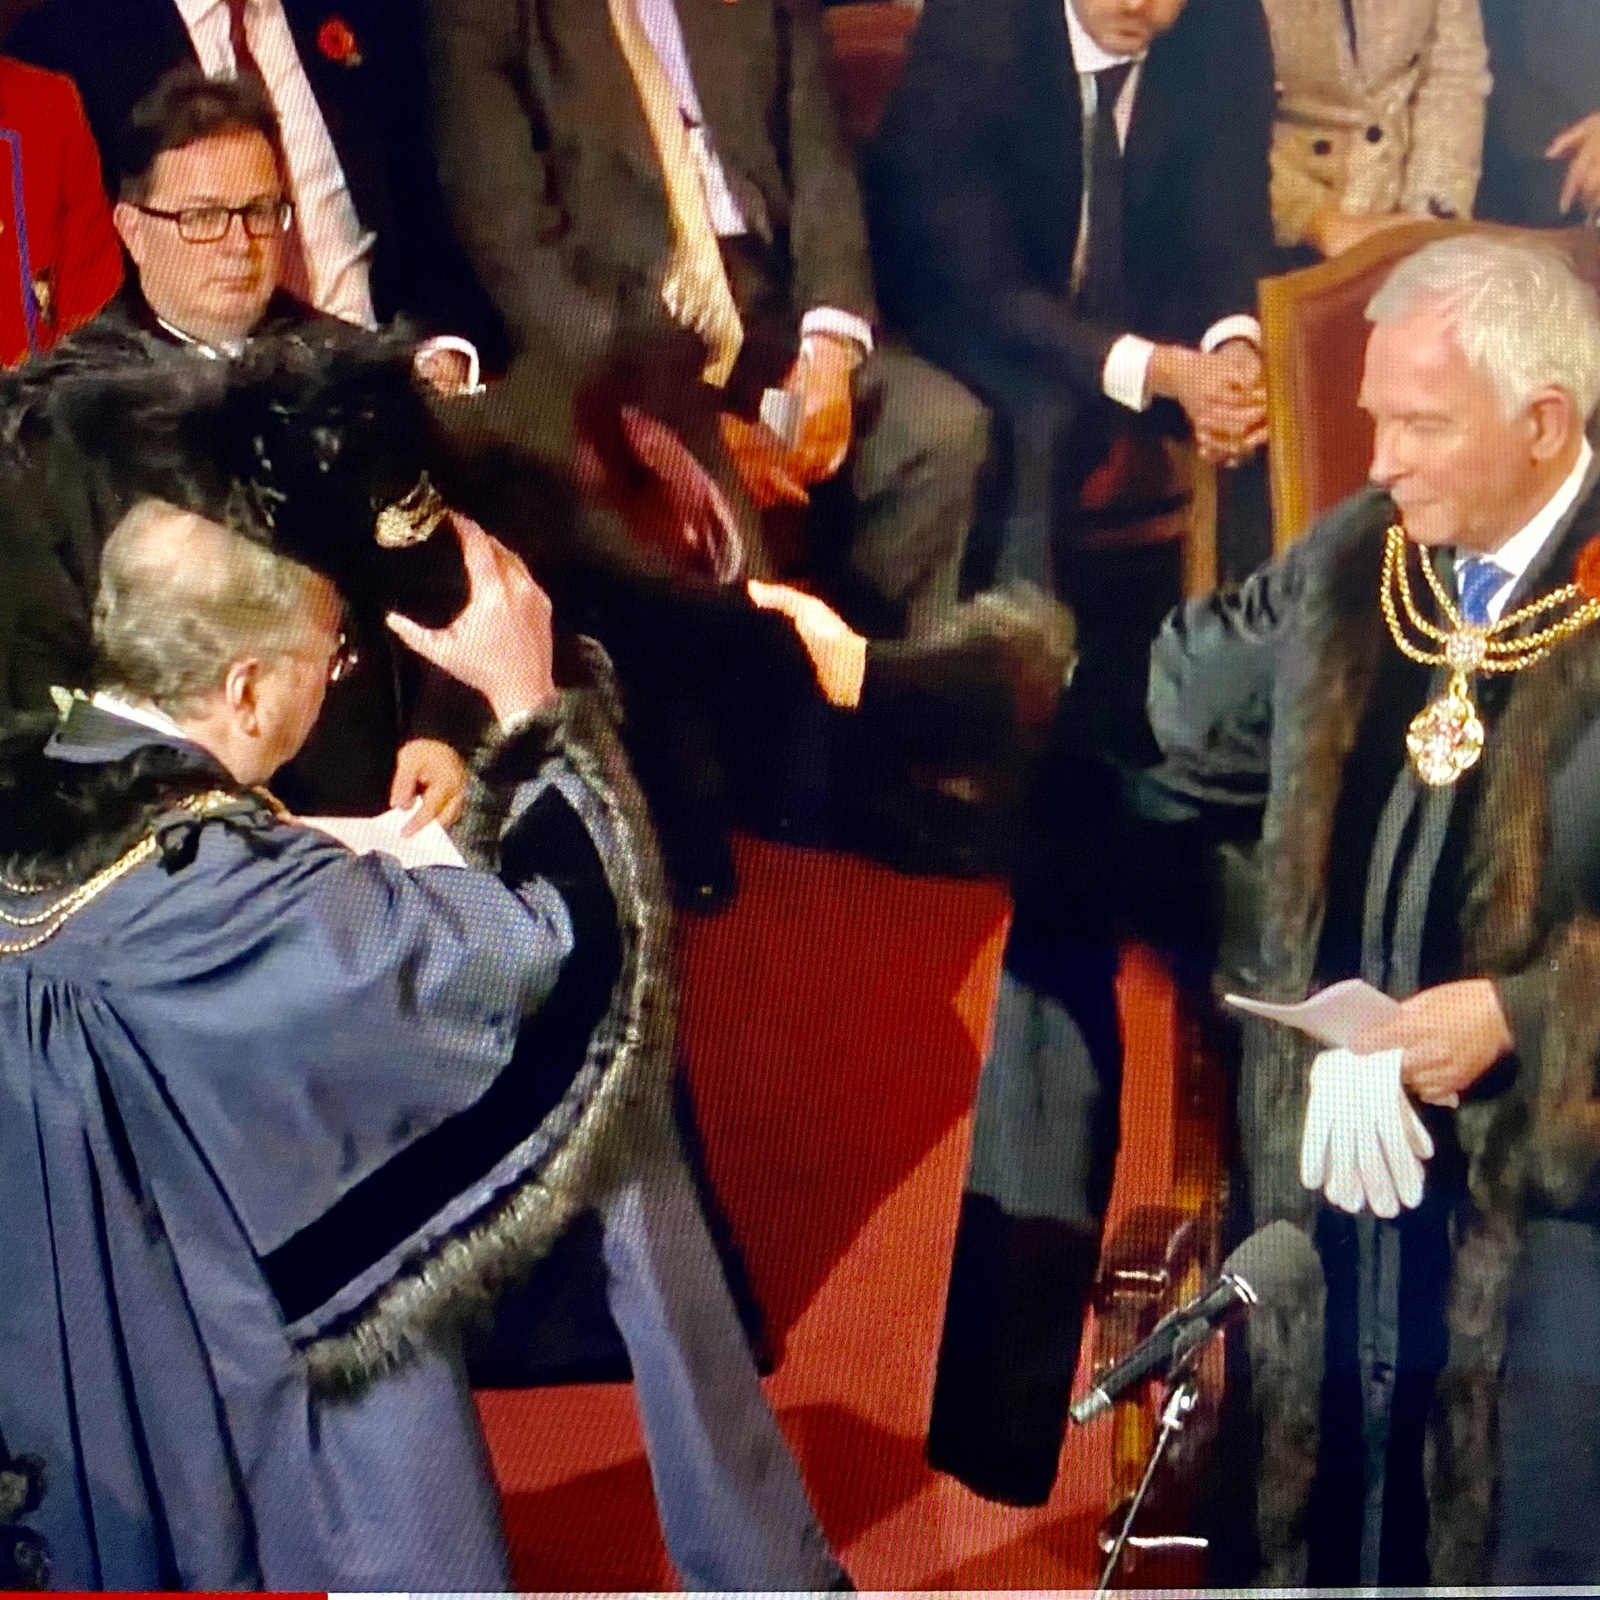 10 November 2023 - The Silent Ceremony in Guildhall…The moment comes…The Lord Mayor Elect is handed his new tricorn hat. The Lord Mayor doffs his. The Lord Mayor Elect places his new hat on his head. The 694th Lord Mayor does not, and thus the 694th Lord Mayor .